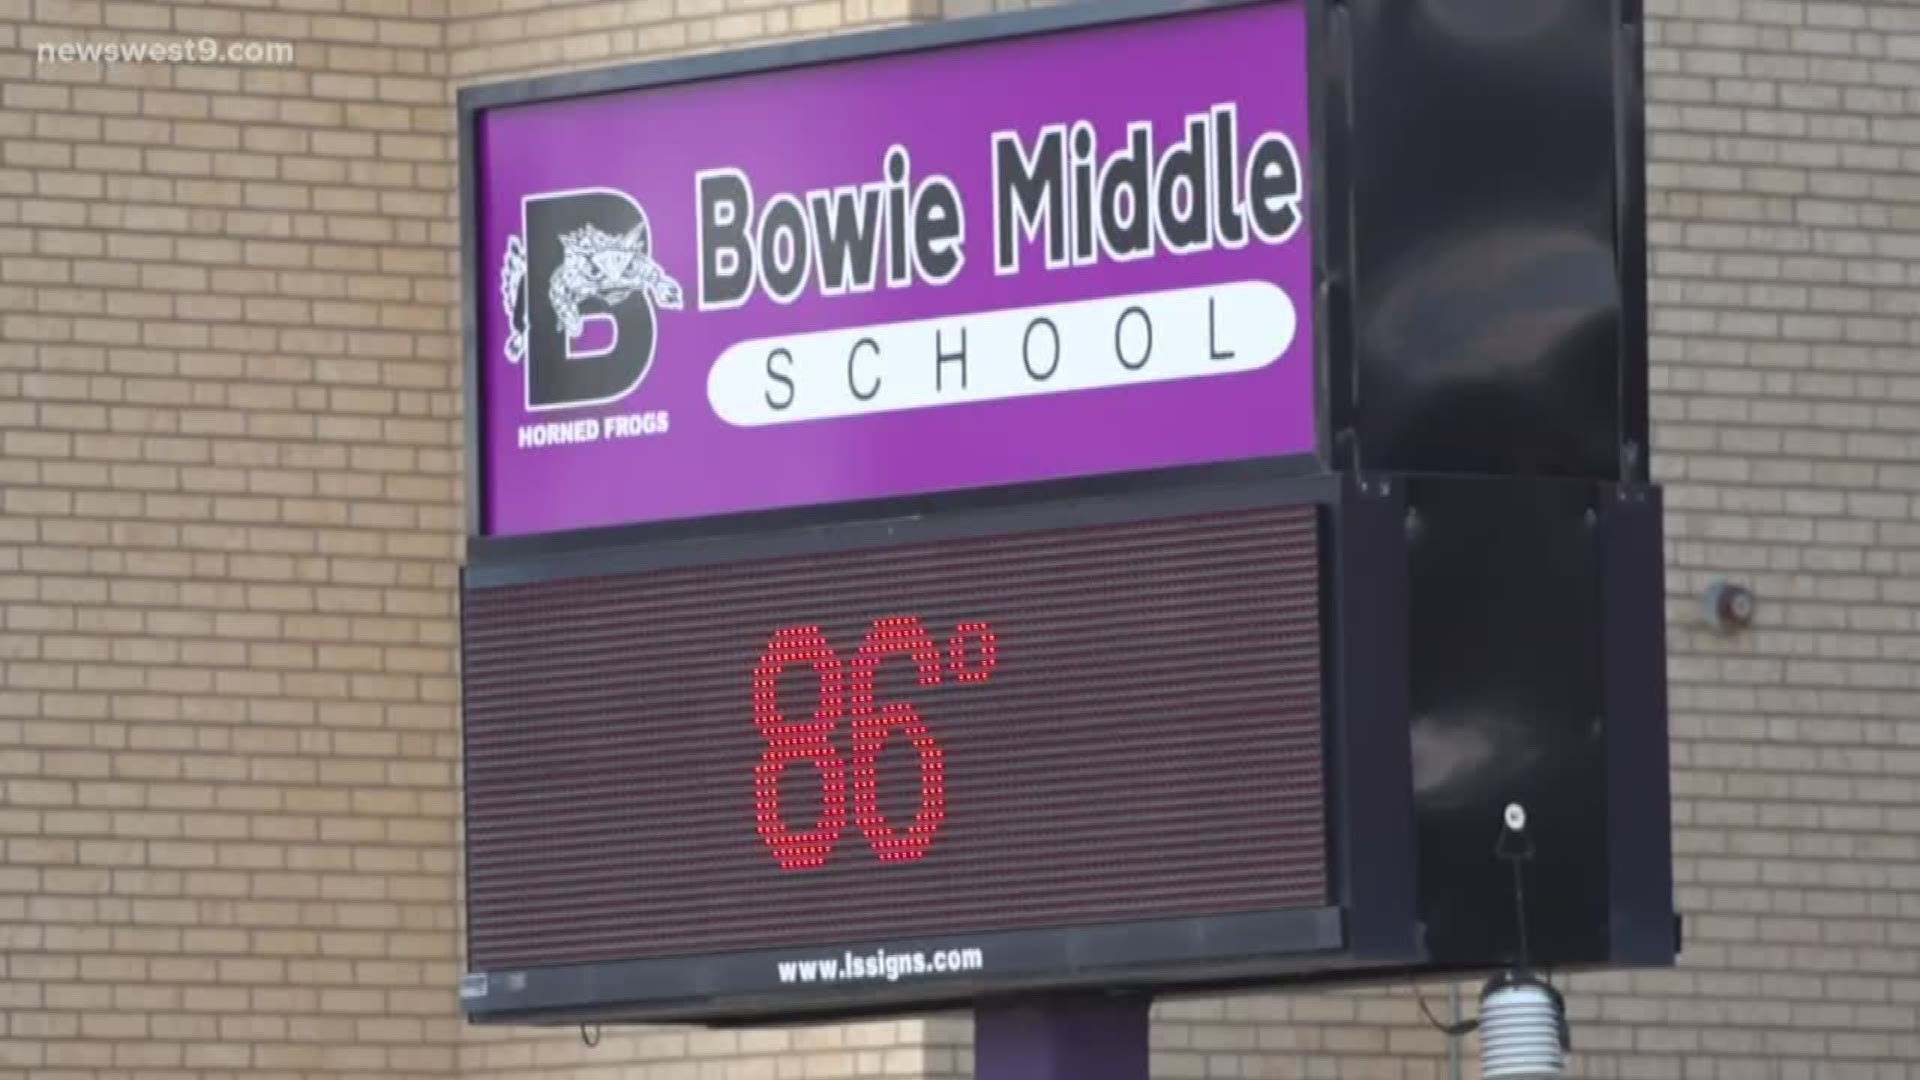 ECISD says Bowie was never on lockdown, but the police were looking into an unsubstantiated Snapchat threat.